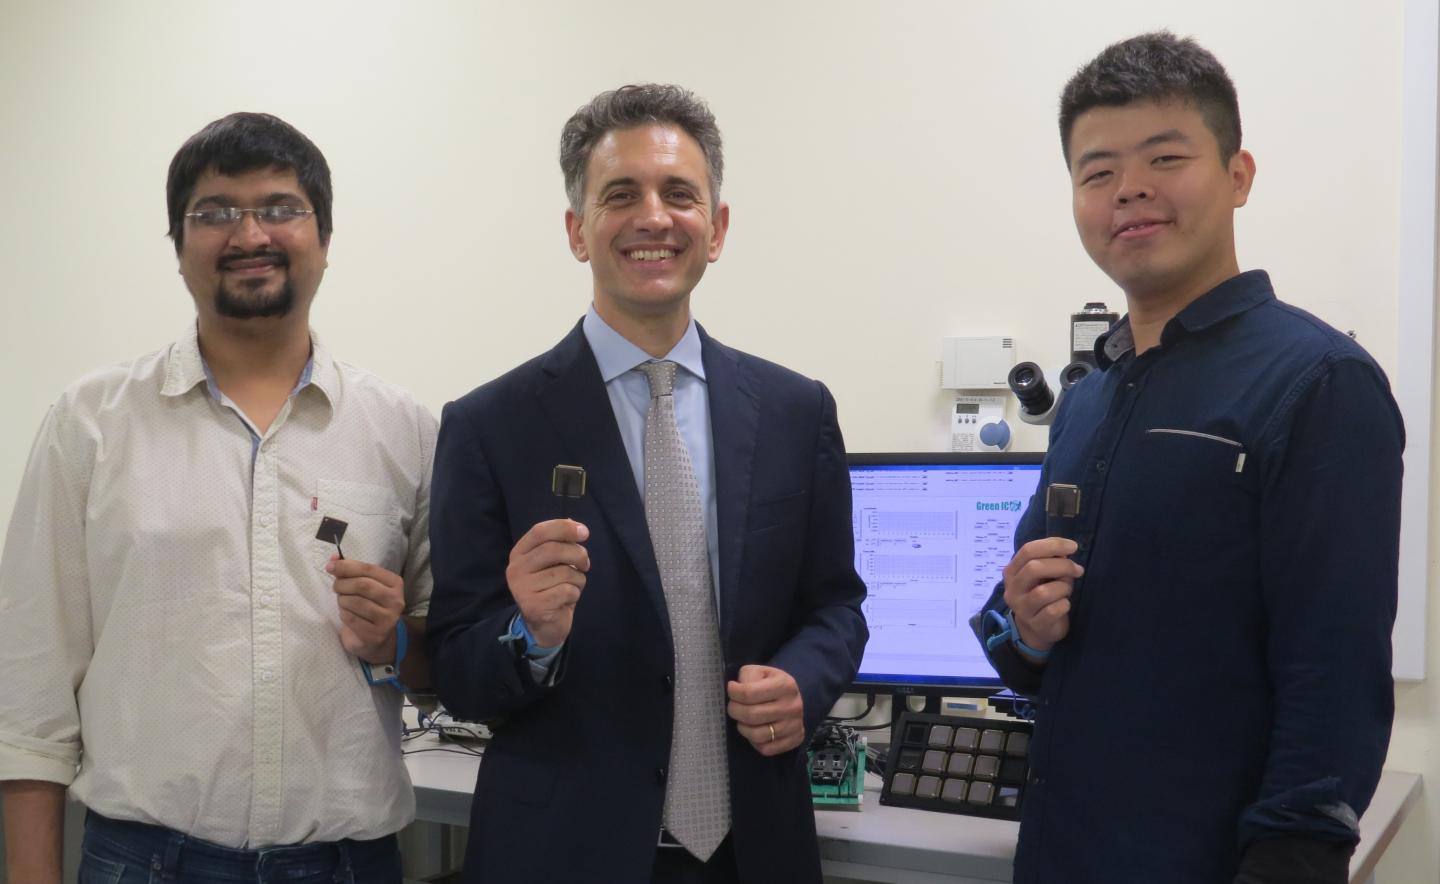 NUS Engineers Invent Smart Microchip that Can Self-Start and Operate when Battery Runs Out